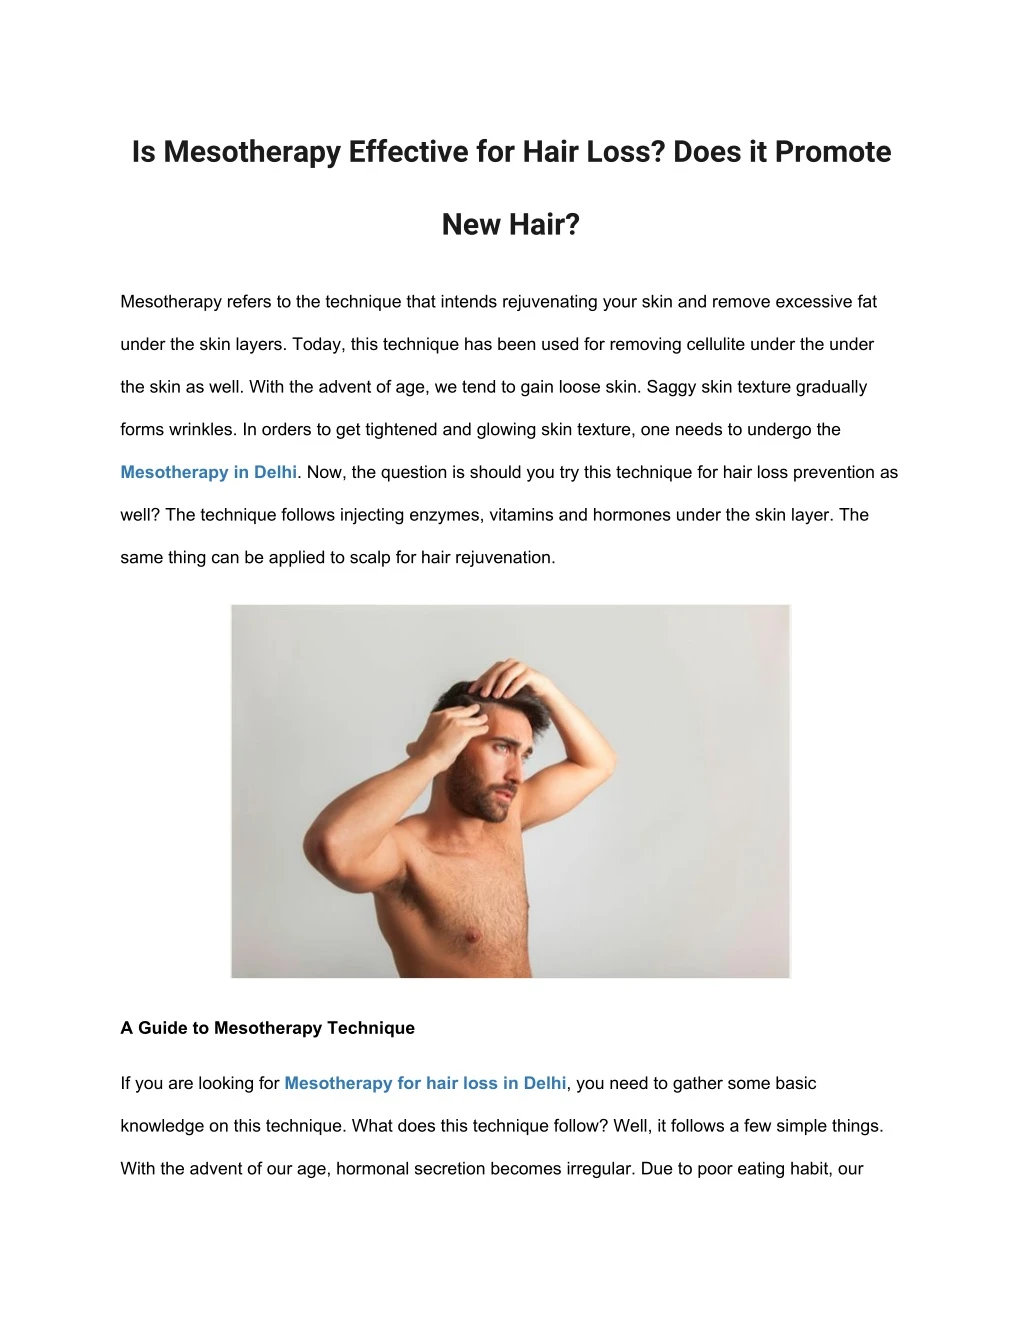 is mesotherapy effective for hair loss does